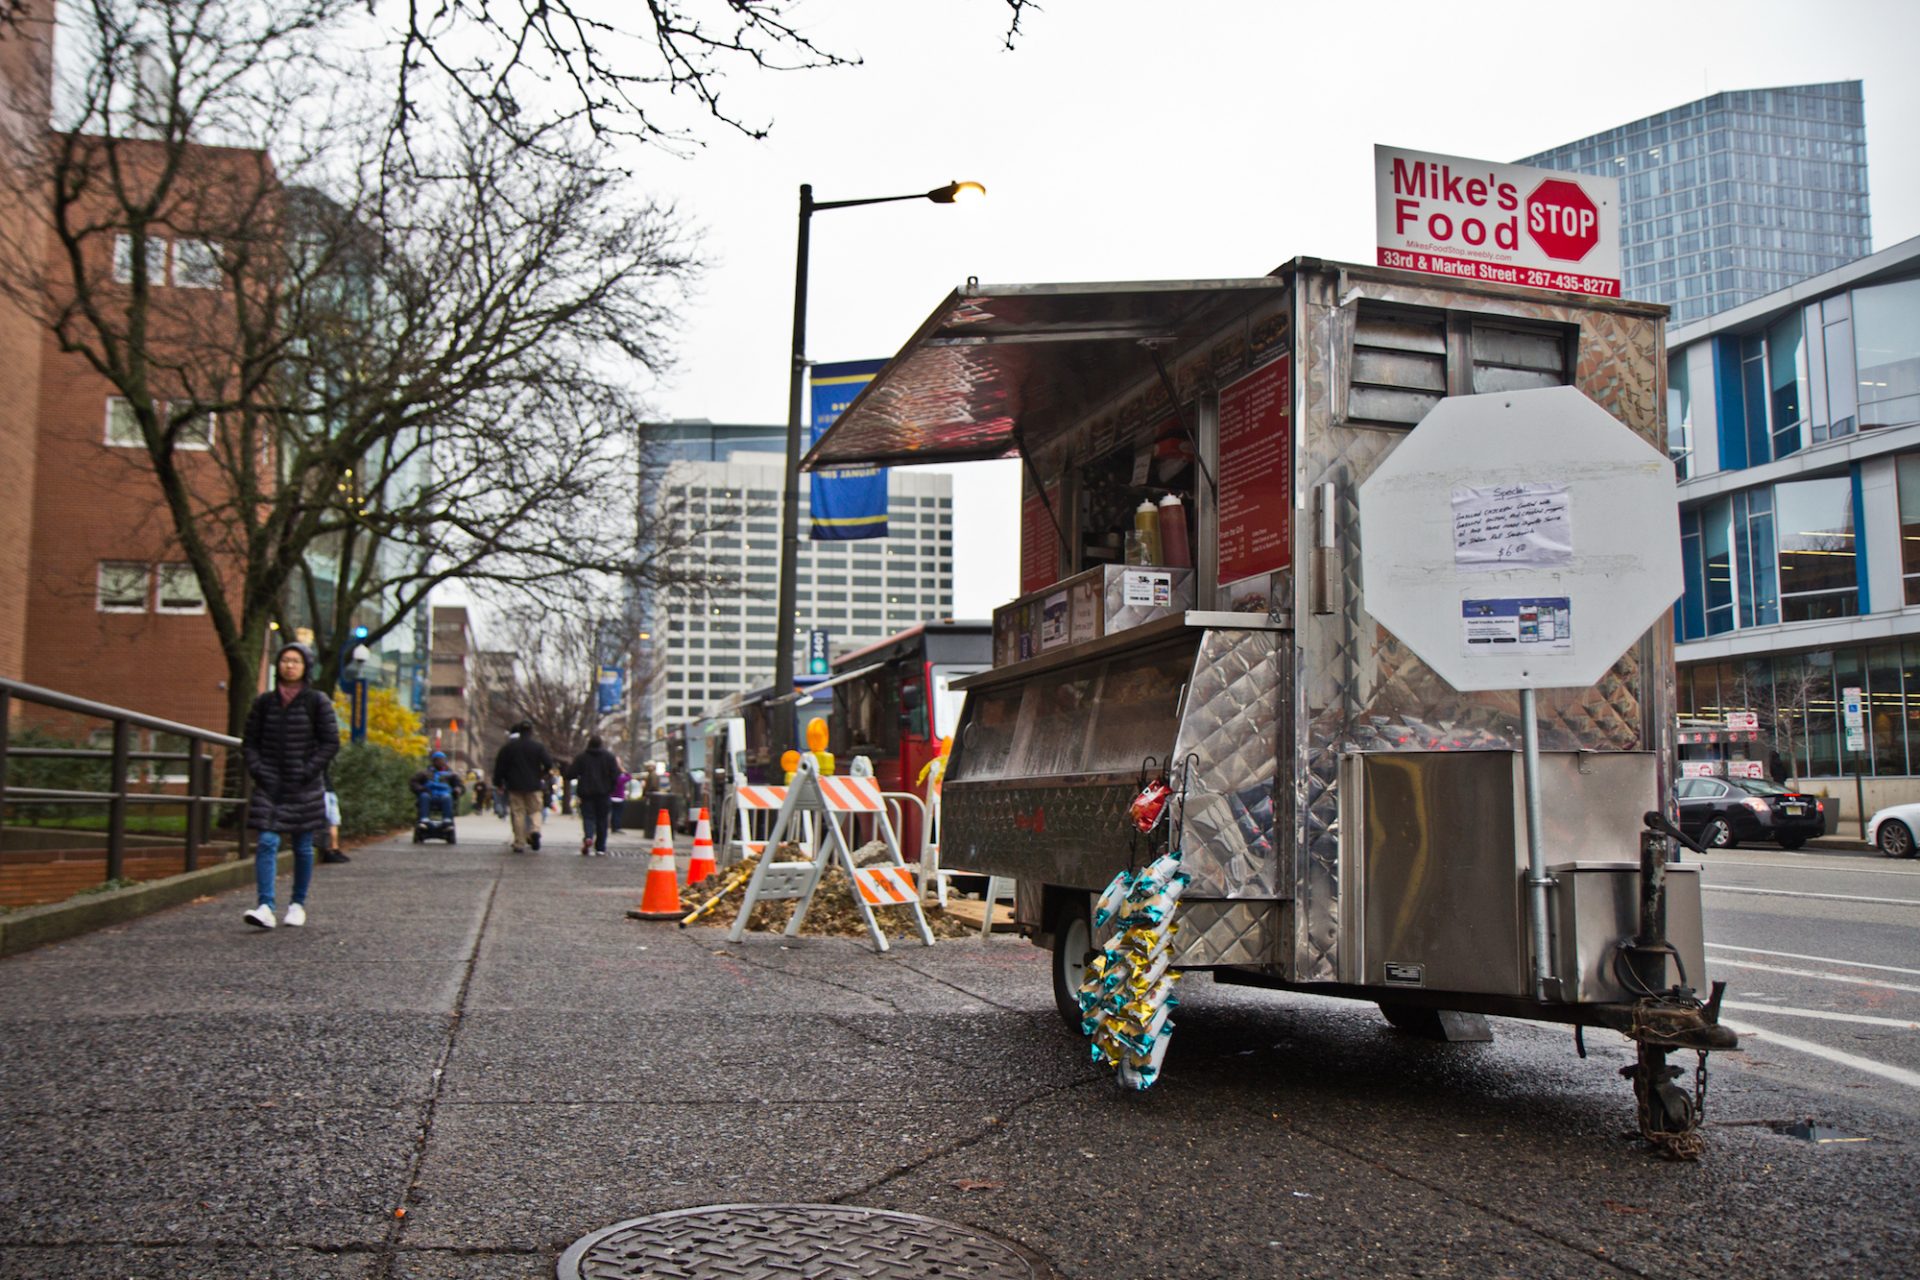 City Council will vote Thursday whether to ban food trucks on 33rd and Market.